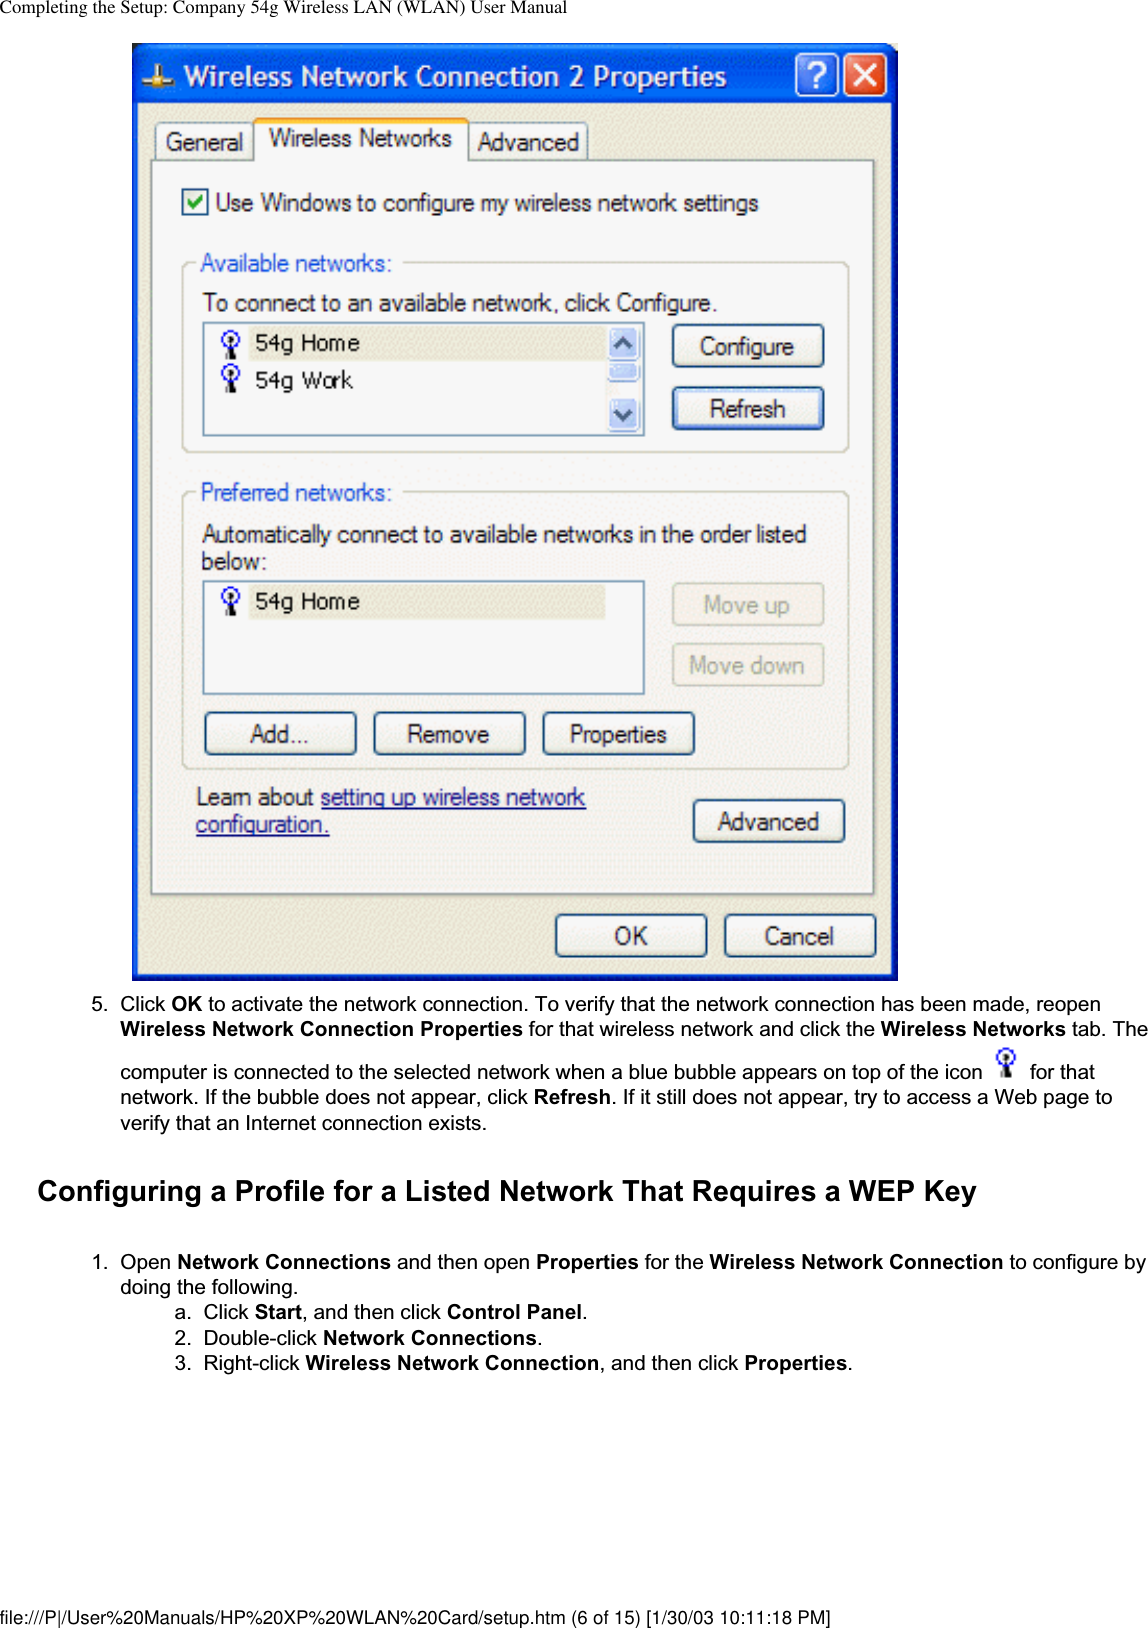 Completing the Setup: Company 54g Wireless LAN (WLAN) User Manual5. Click OK to activate the network connection. To verify that the network connection has been made, reopen Wireless Network Connection Properties for that wireless network and click the Wireless Networks tab. The computer is connected to the selected network when a blue bubble appears on top of the icon   for that network. If the bubble does not appear, click Refresh. If it still does not appear, try to access a Web page to verify that an Internet connection exists. Configuring a Profile for a Listed Network That Requires a WEP Key1. Open Network Connections and then open Properties for the Wireless Network Connection to configure by doing the following. a. Click Start, and then click Control Panel.2. Double-click Network Connections.3. Right-click Wireless Network Connection, and then click Properties.file:///P|/User%20Manuals/HP%20XP%20WLAN%20Card/setup.htm (6 of 15) [1/30/03 10:11:18 PM]